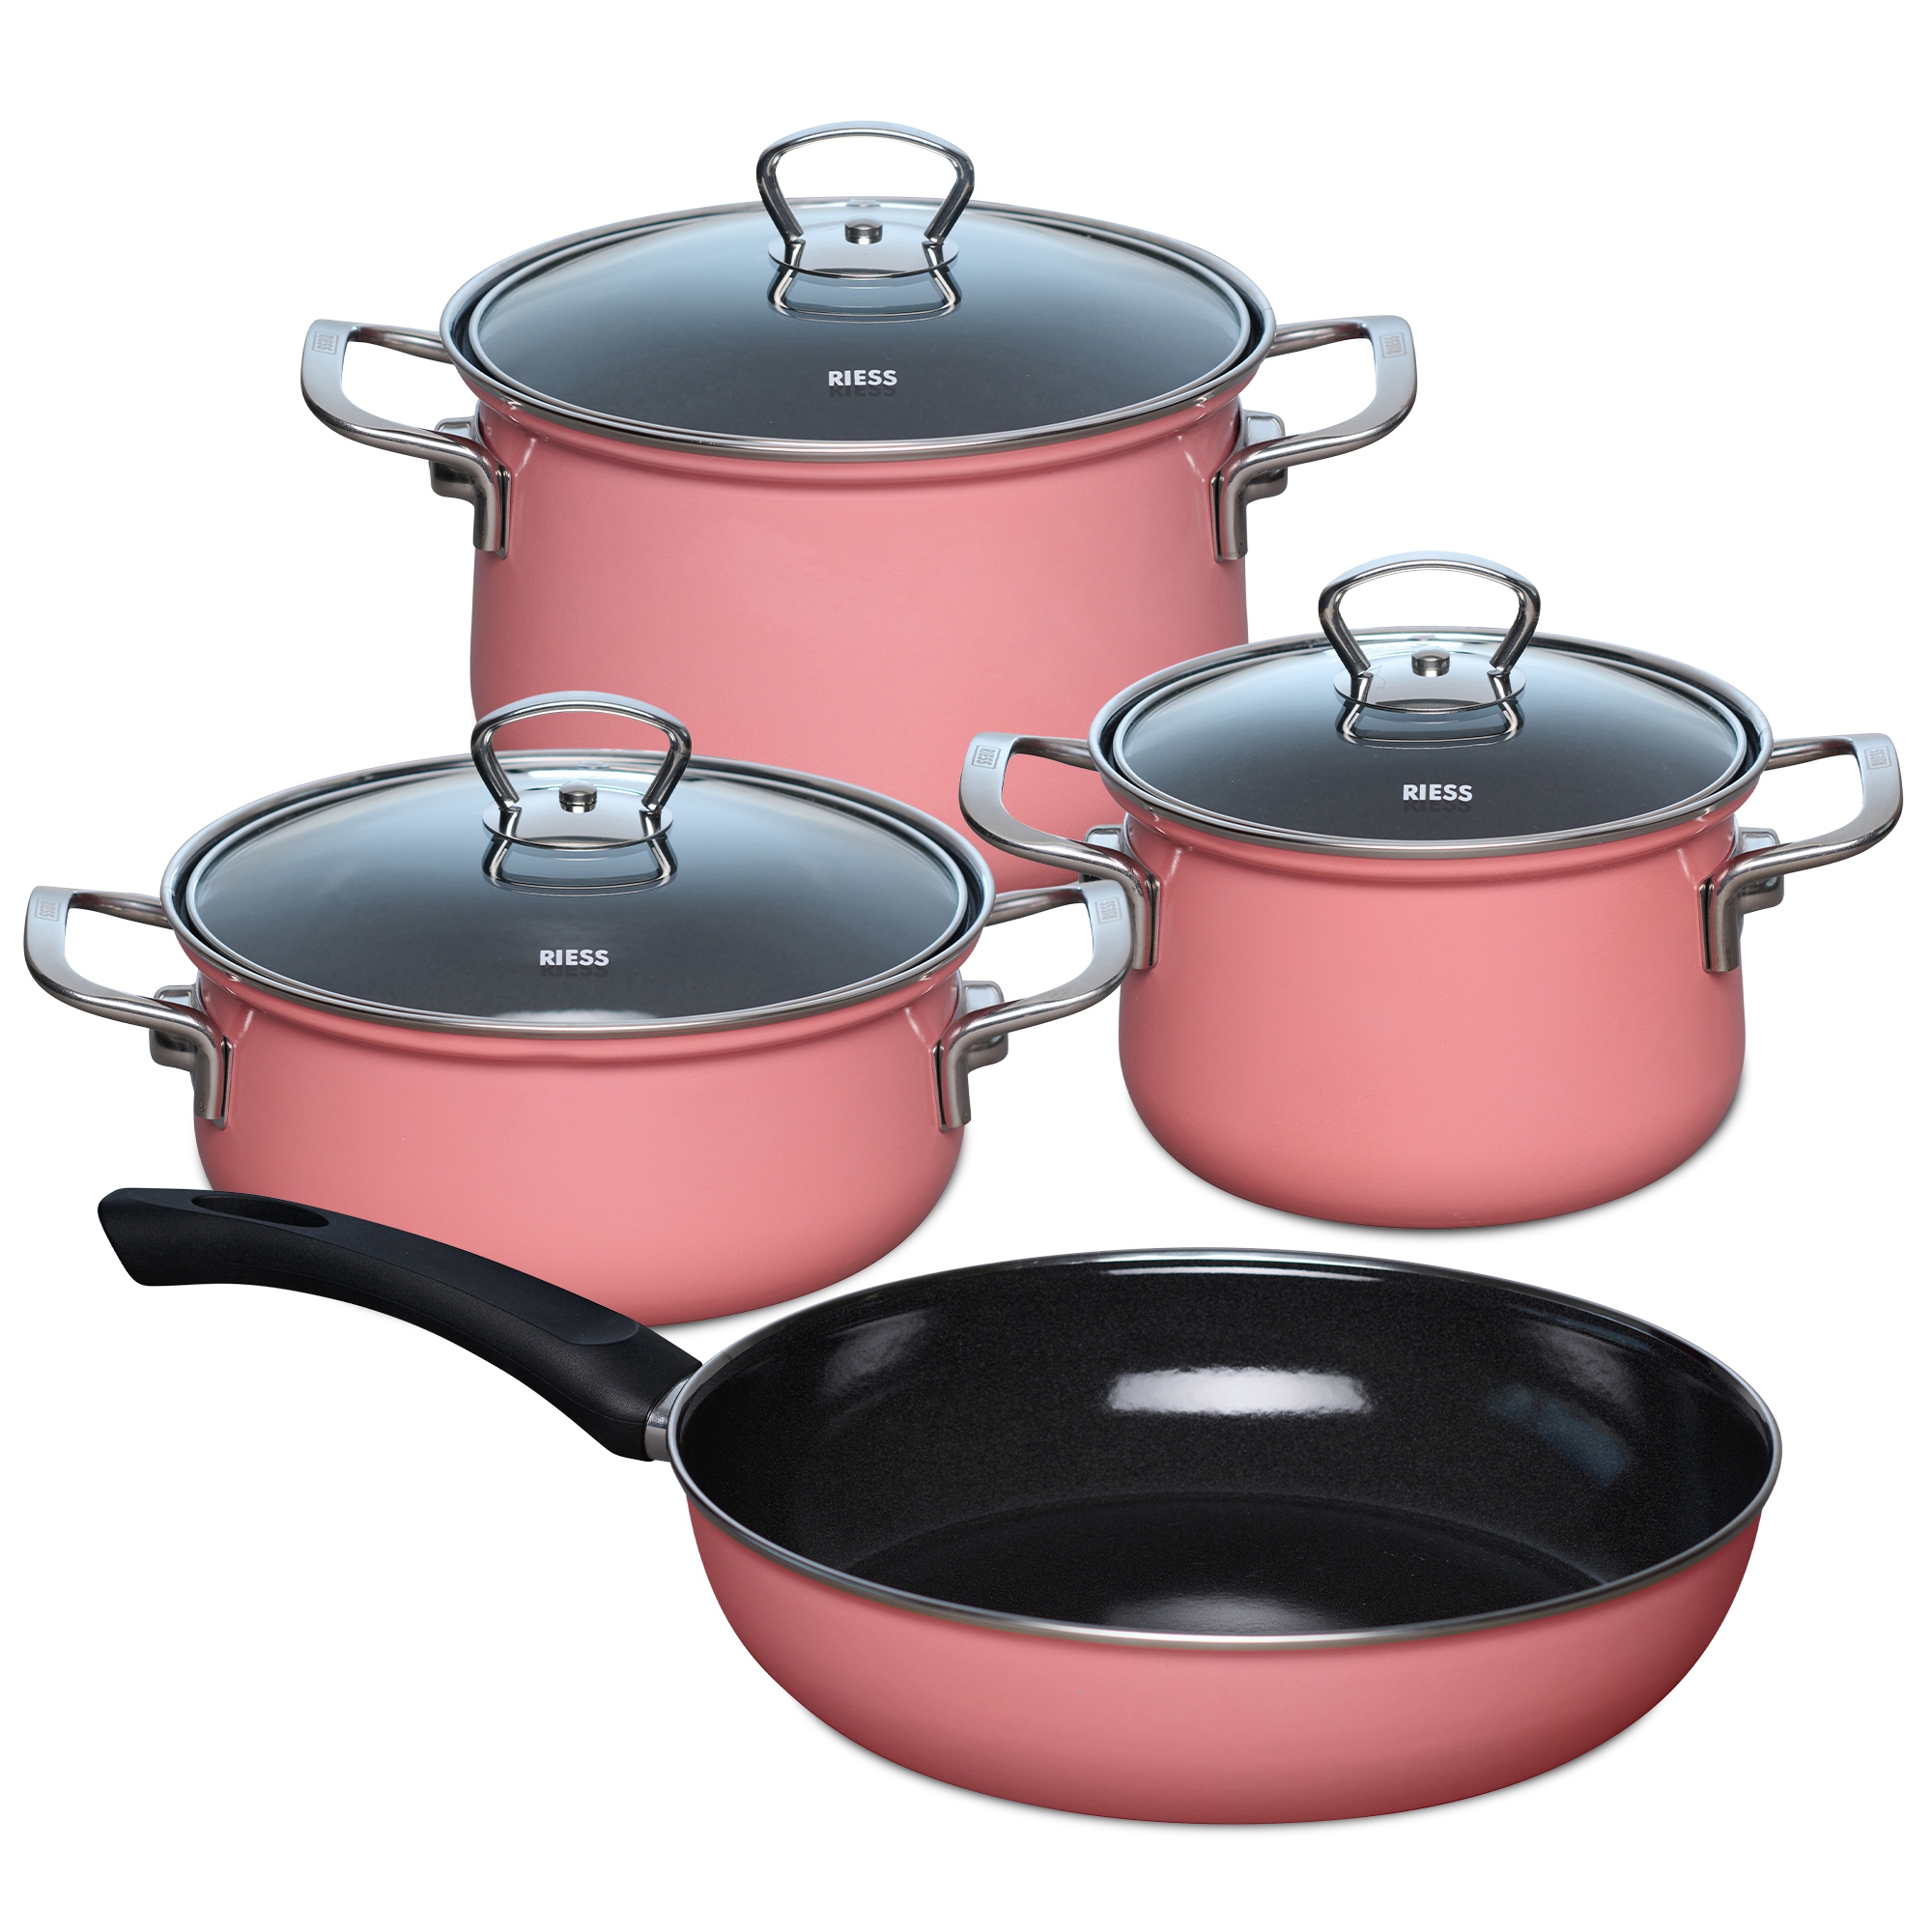 Riess NOUVELLE - Pink - Crockery set of 4